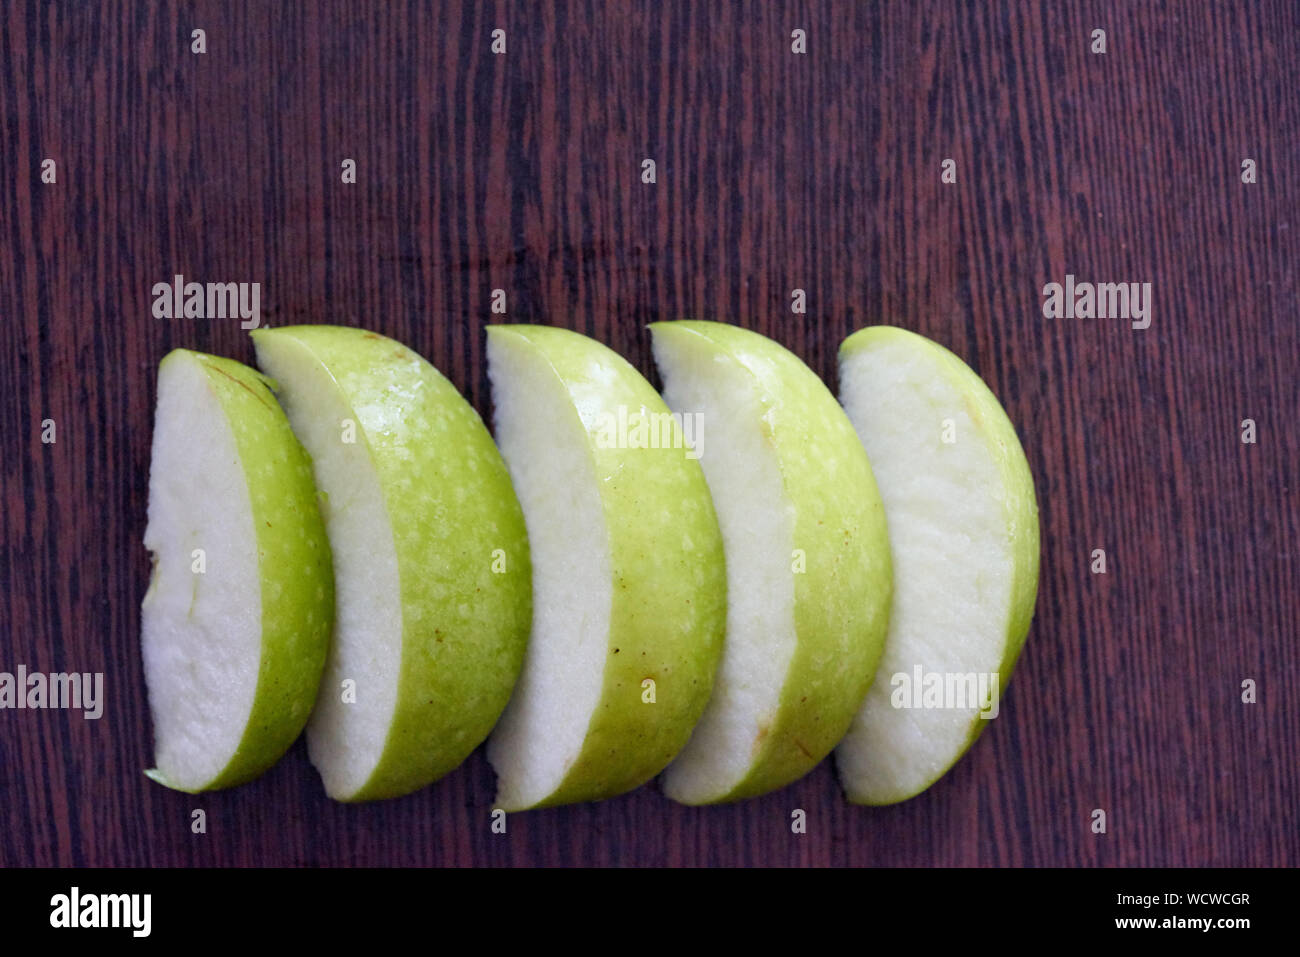 Directly Above View Of Chopped Apples Stock Photo